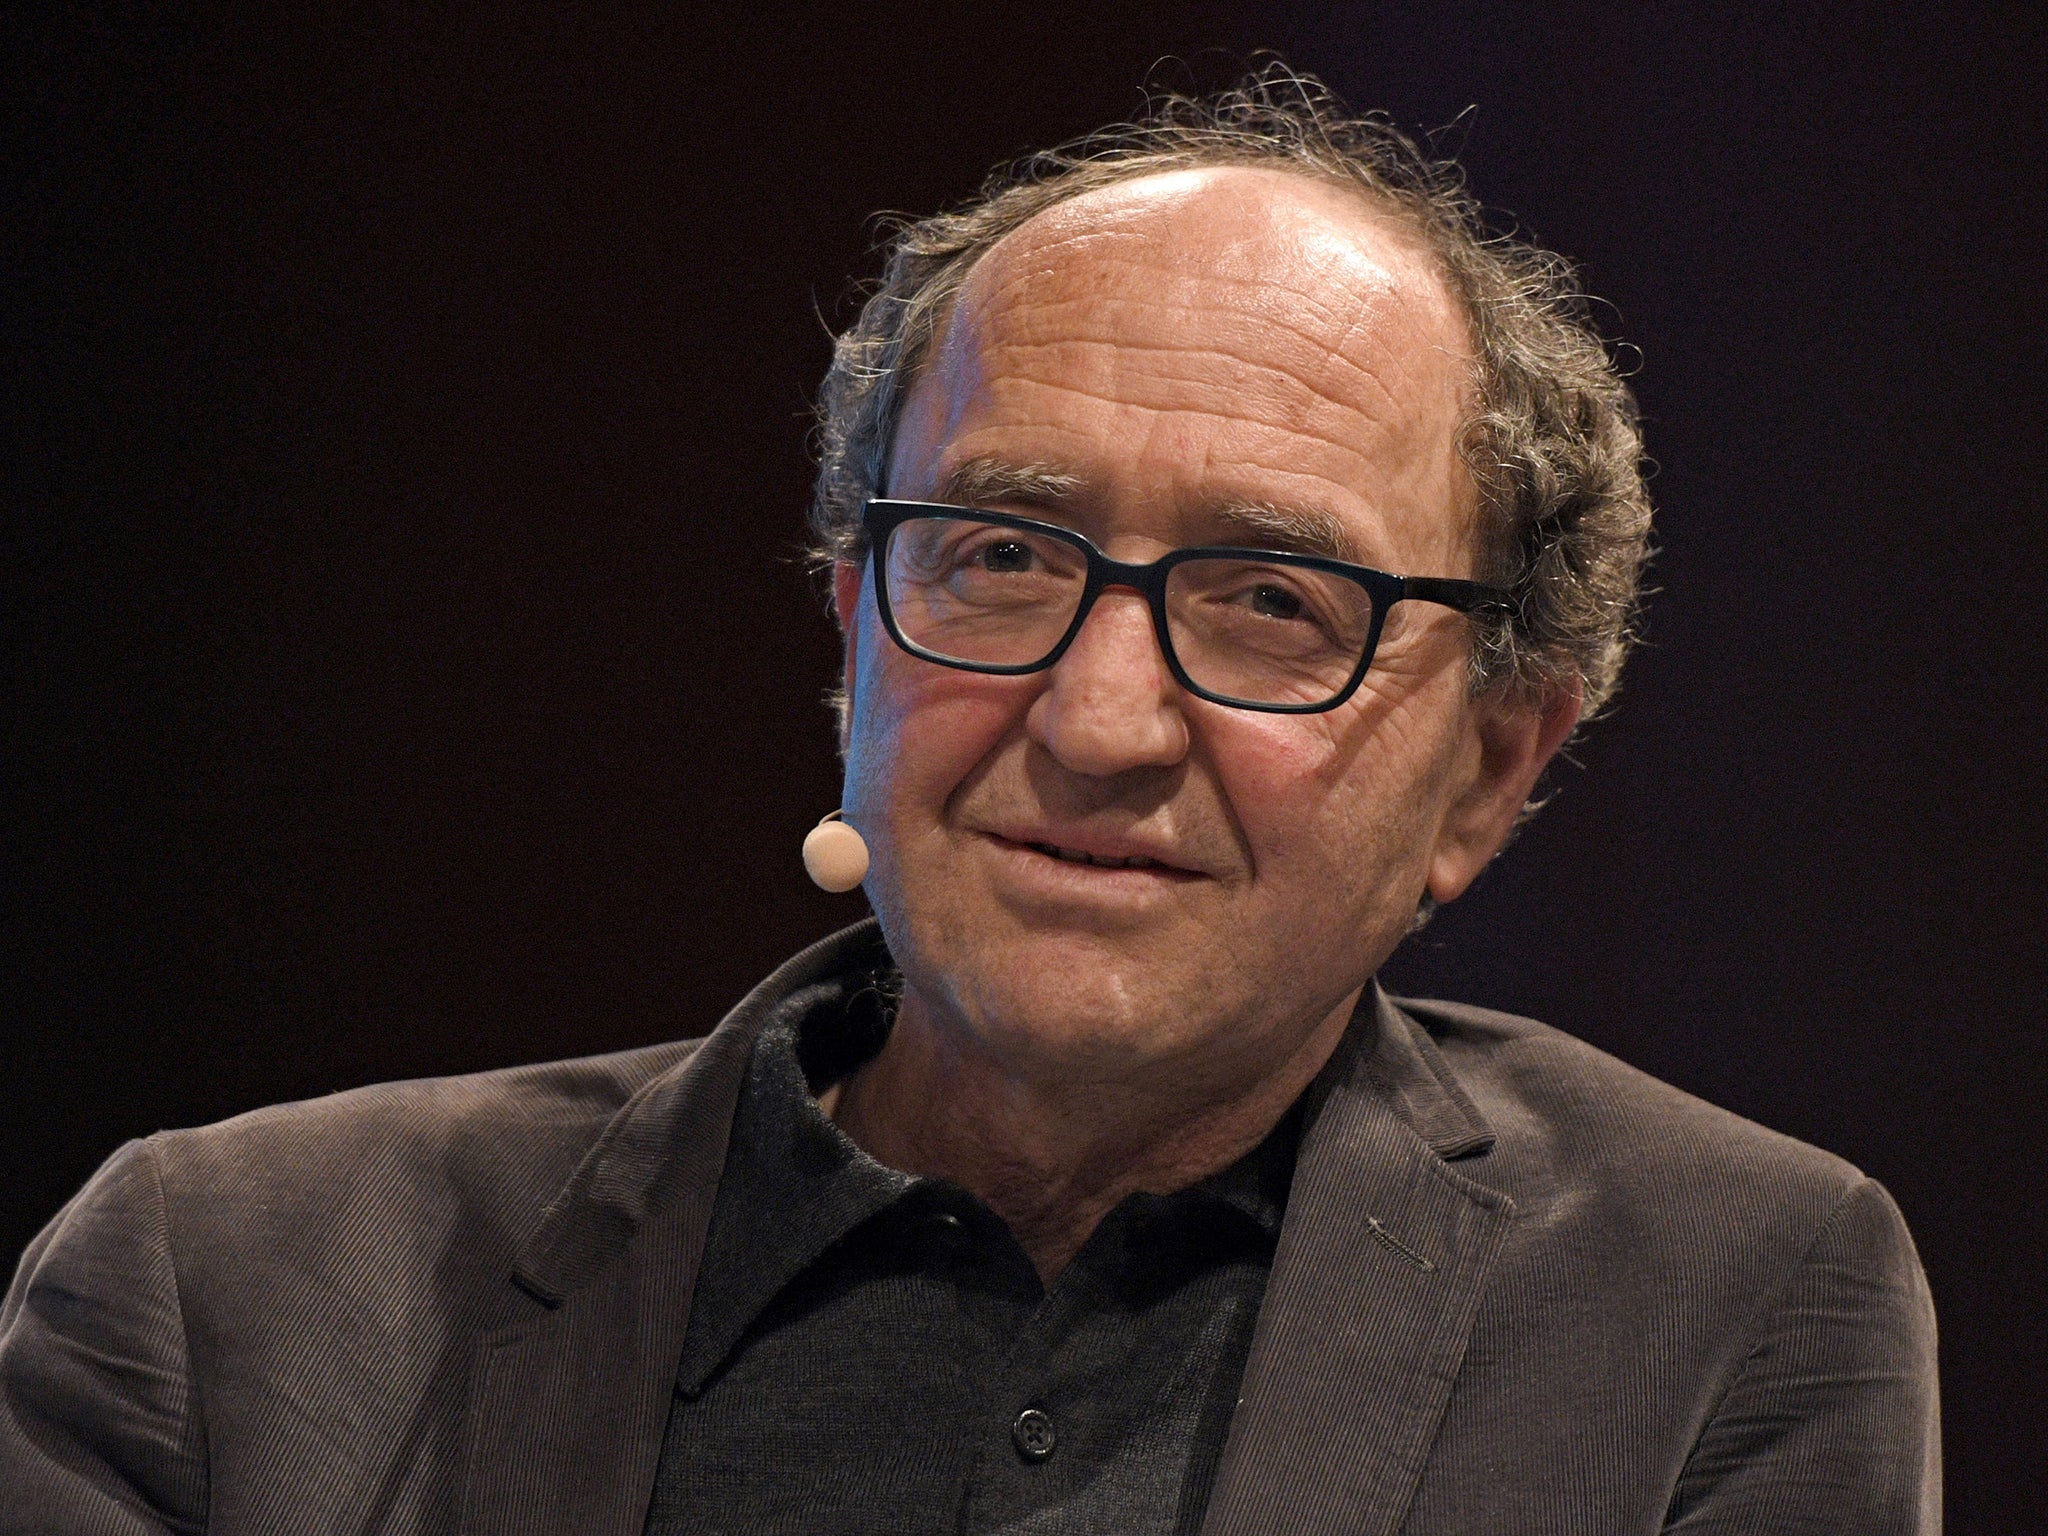 German author of Turkish origin Dogan Akhanli pictured taking part in a panel discussion during a literature festival in Cologne in March. He was arrested in Spain on 19 August on the request of the Turkish government.